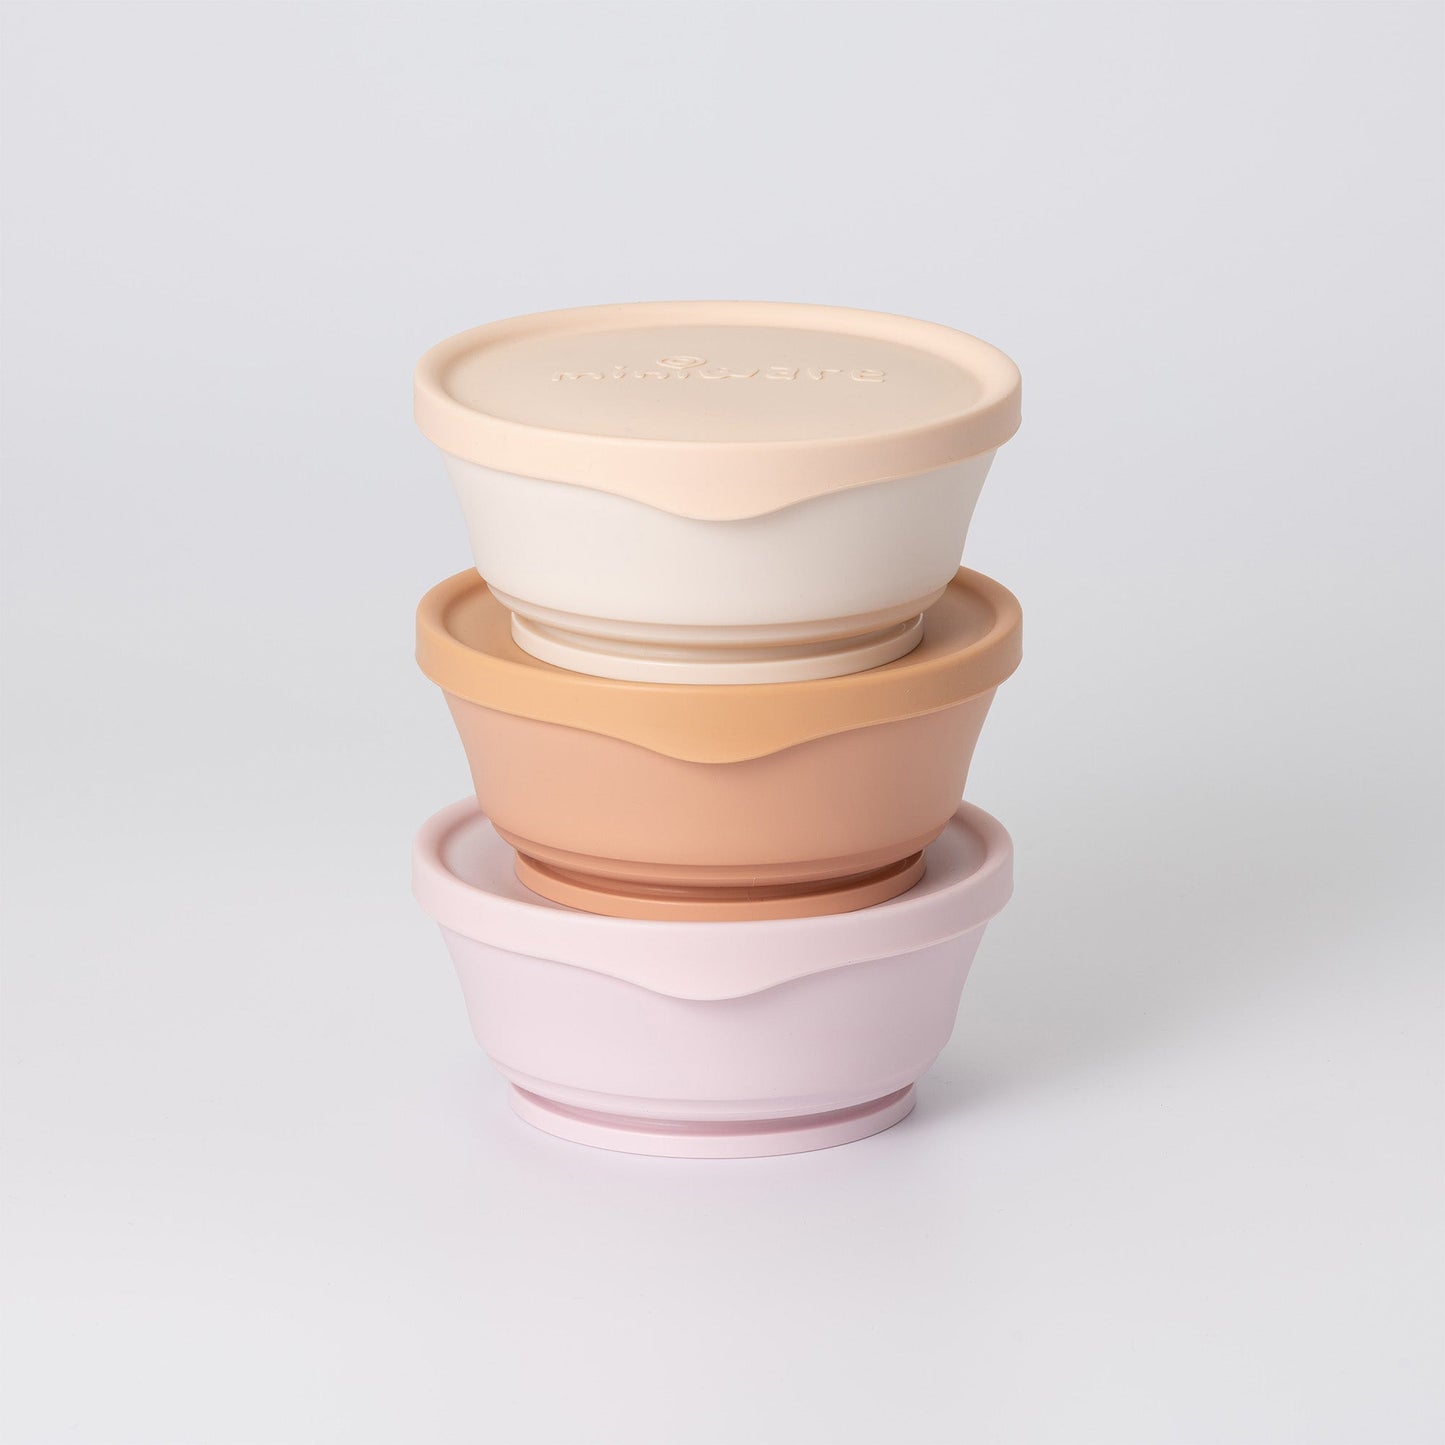 Cereal bowl - Pack of 3 (Cotton Candy/Toffee/Vanilla)